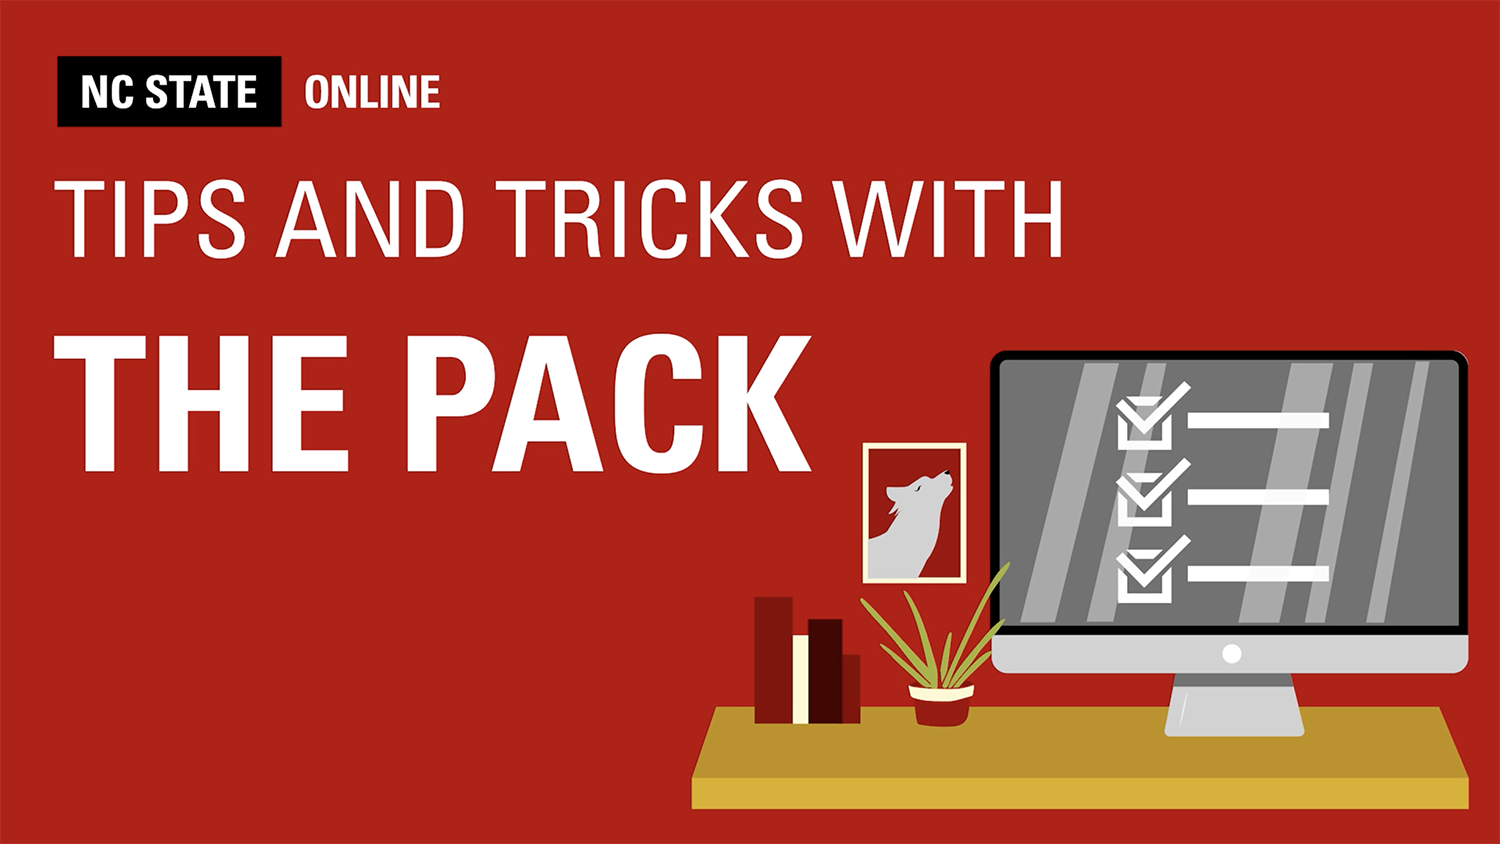 NC State Online. Tips and Tricks with the Pack.